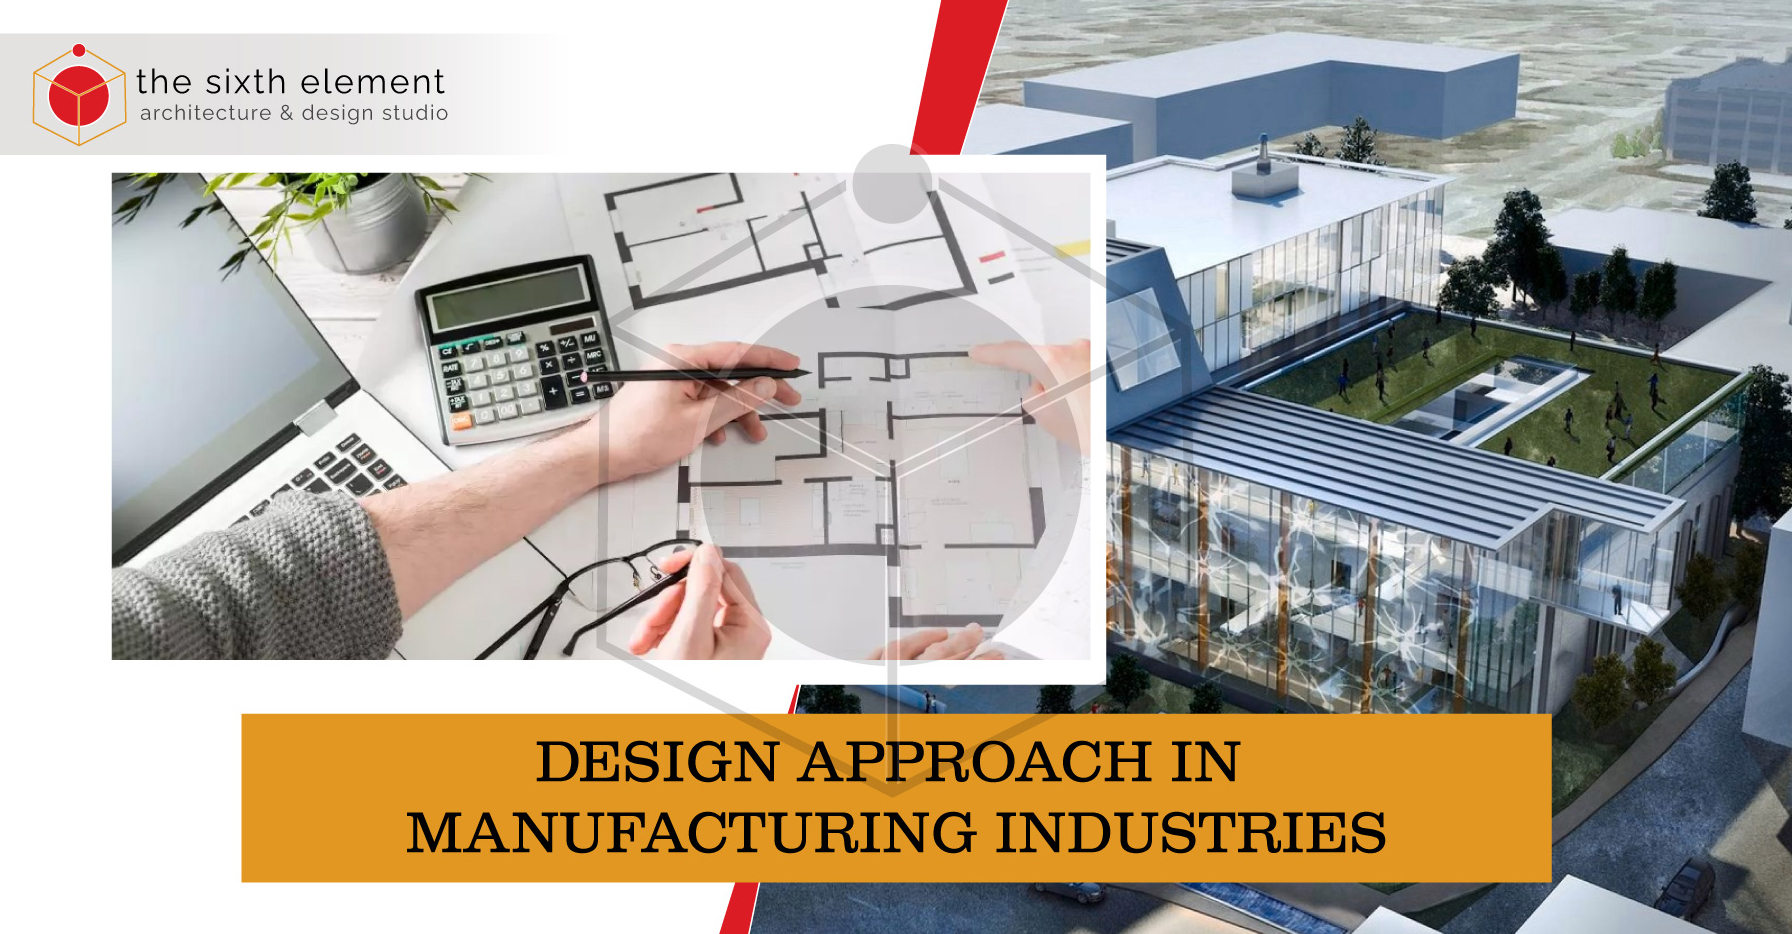 
Information about The design approach in manufacturing industries